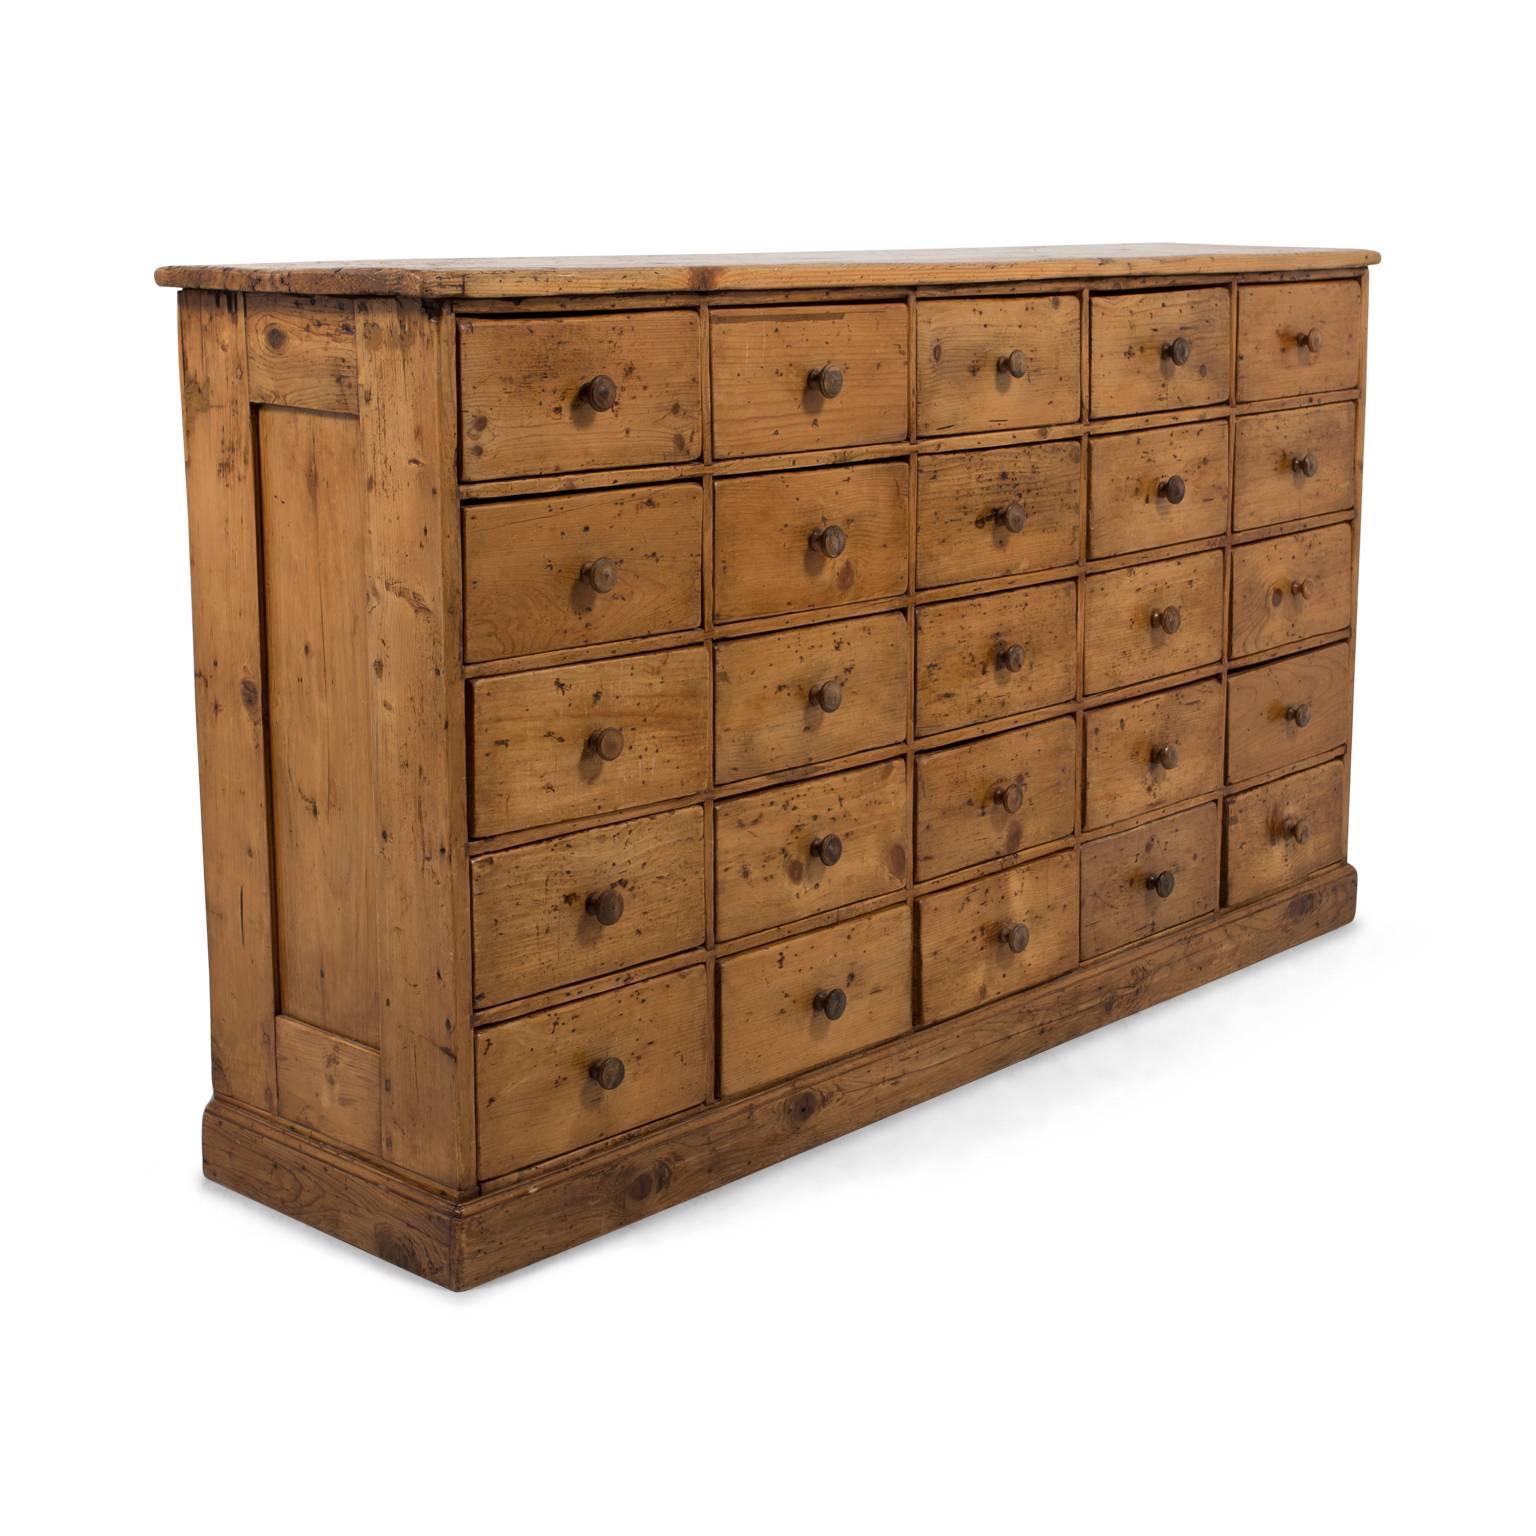 Great patination and wear on this solid pine country French apothecary cabinet with 25 drawers. 19th century, France.